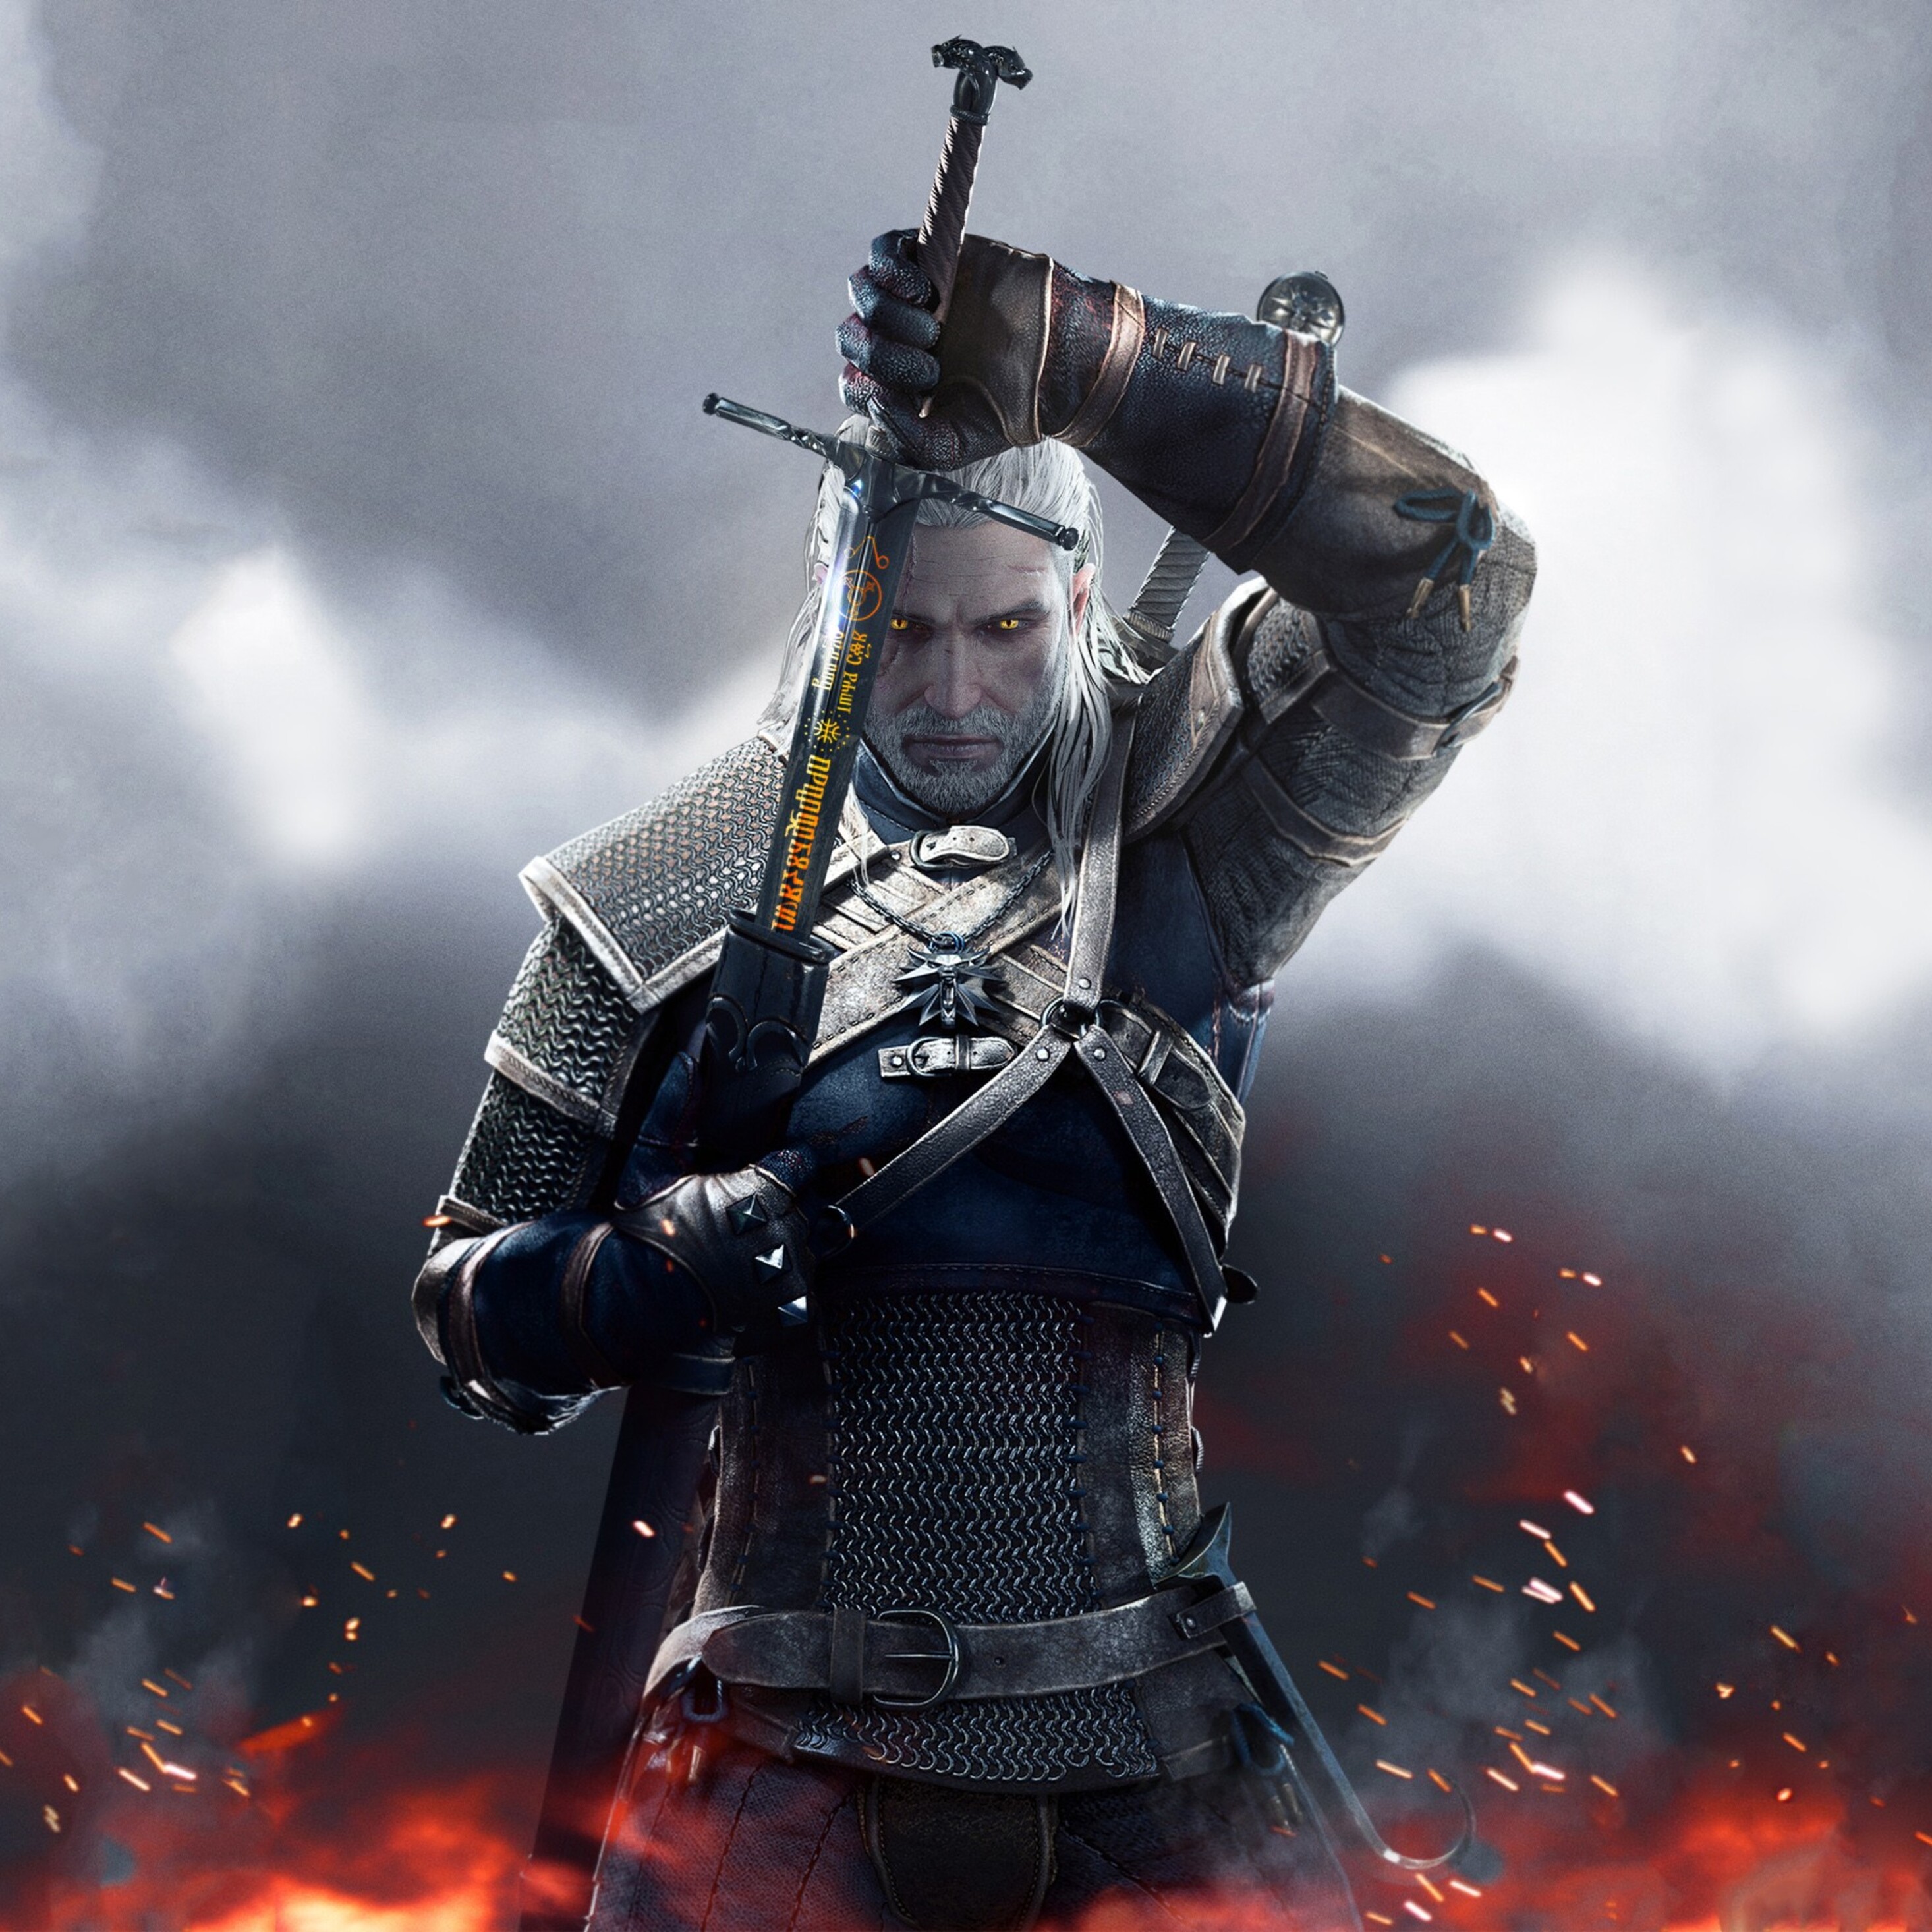 Top 92+ Images best the witcher 3 wallpapers Full HD, 2k, 4k